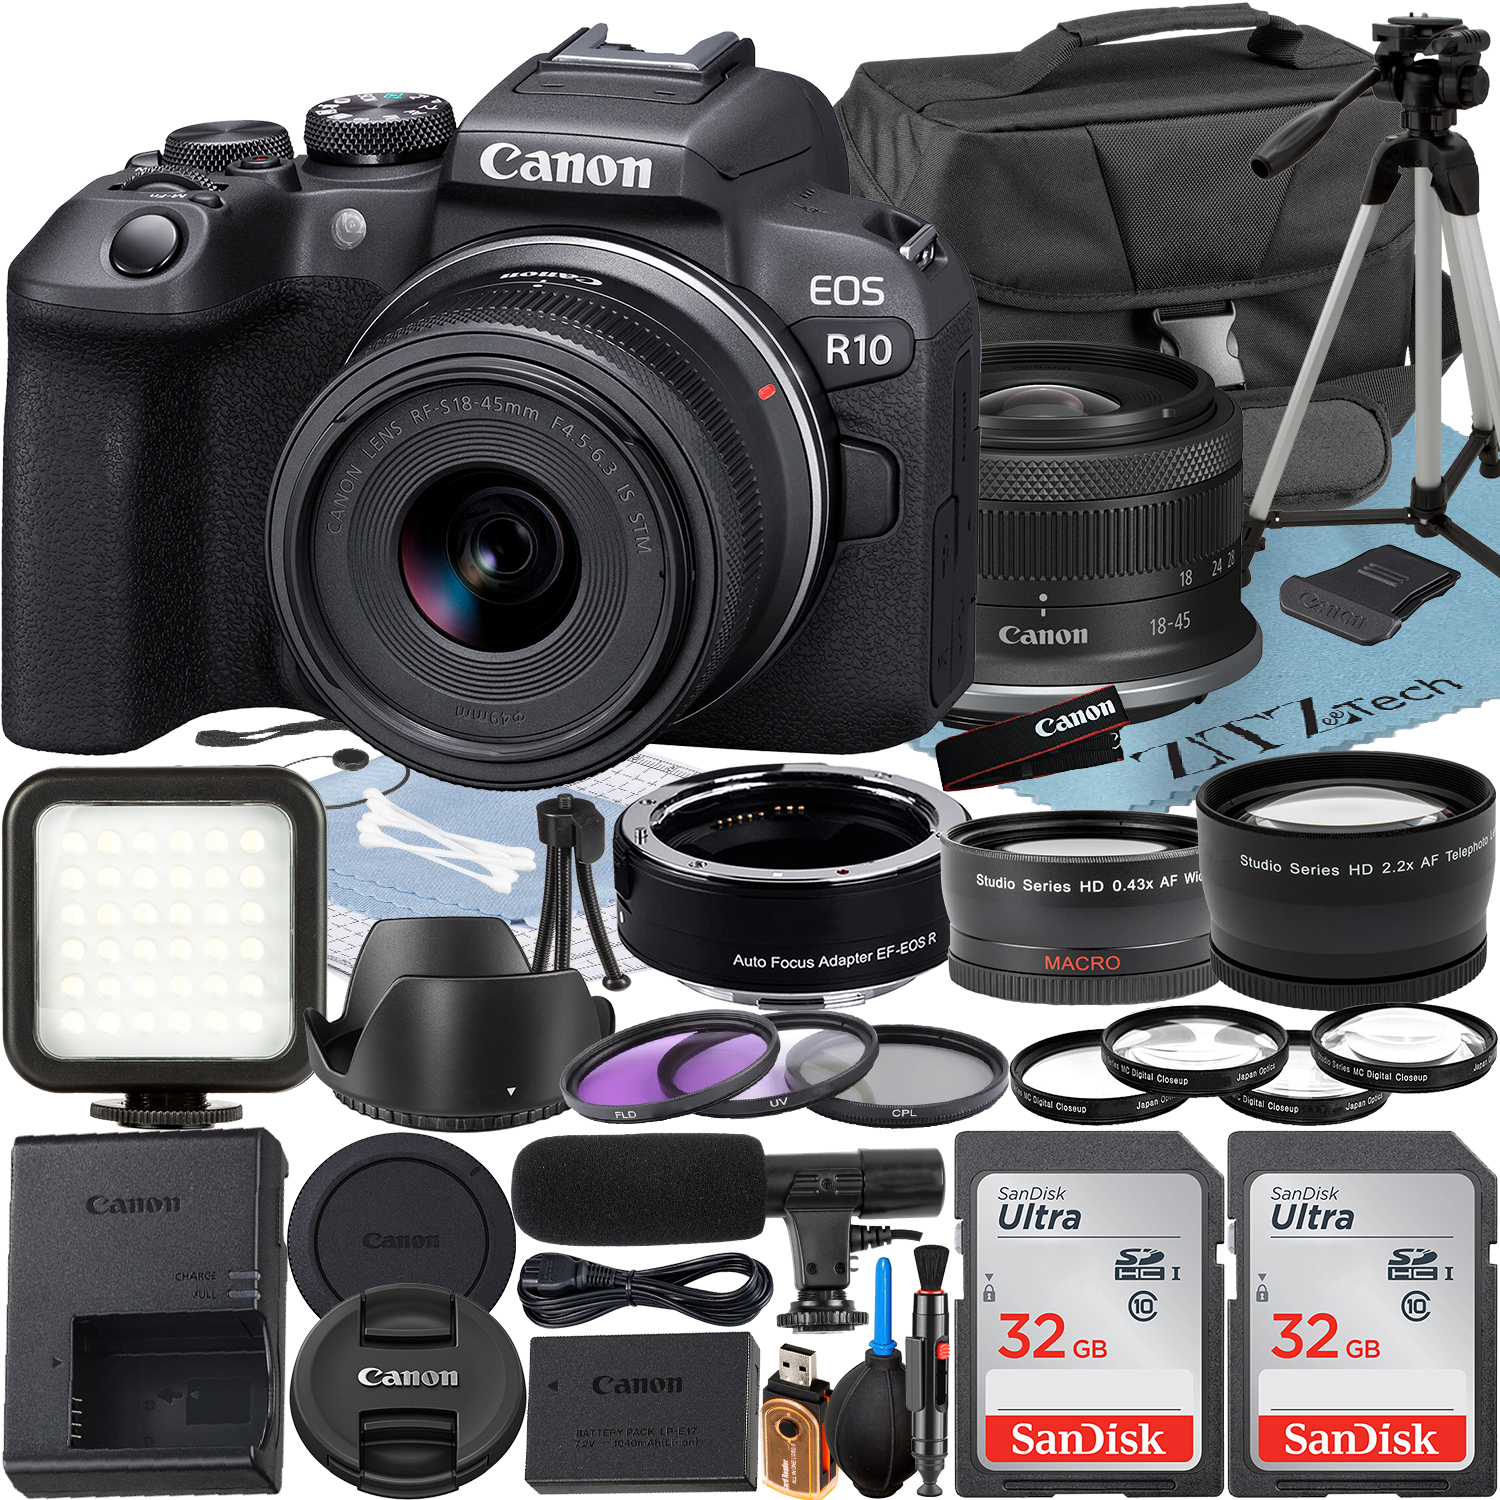 Canon EOS R10 Mirrorless Camera with RF-S 18-45mm Lens + Mount Adapter + 2 Pack SanDisk 32GB Memory Card + Case + ZeeTech Accessory